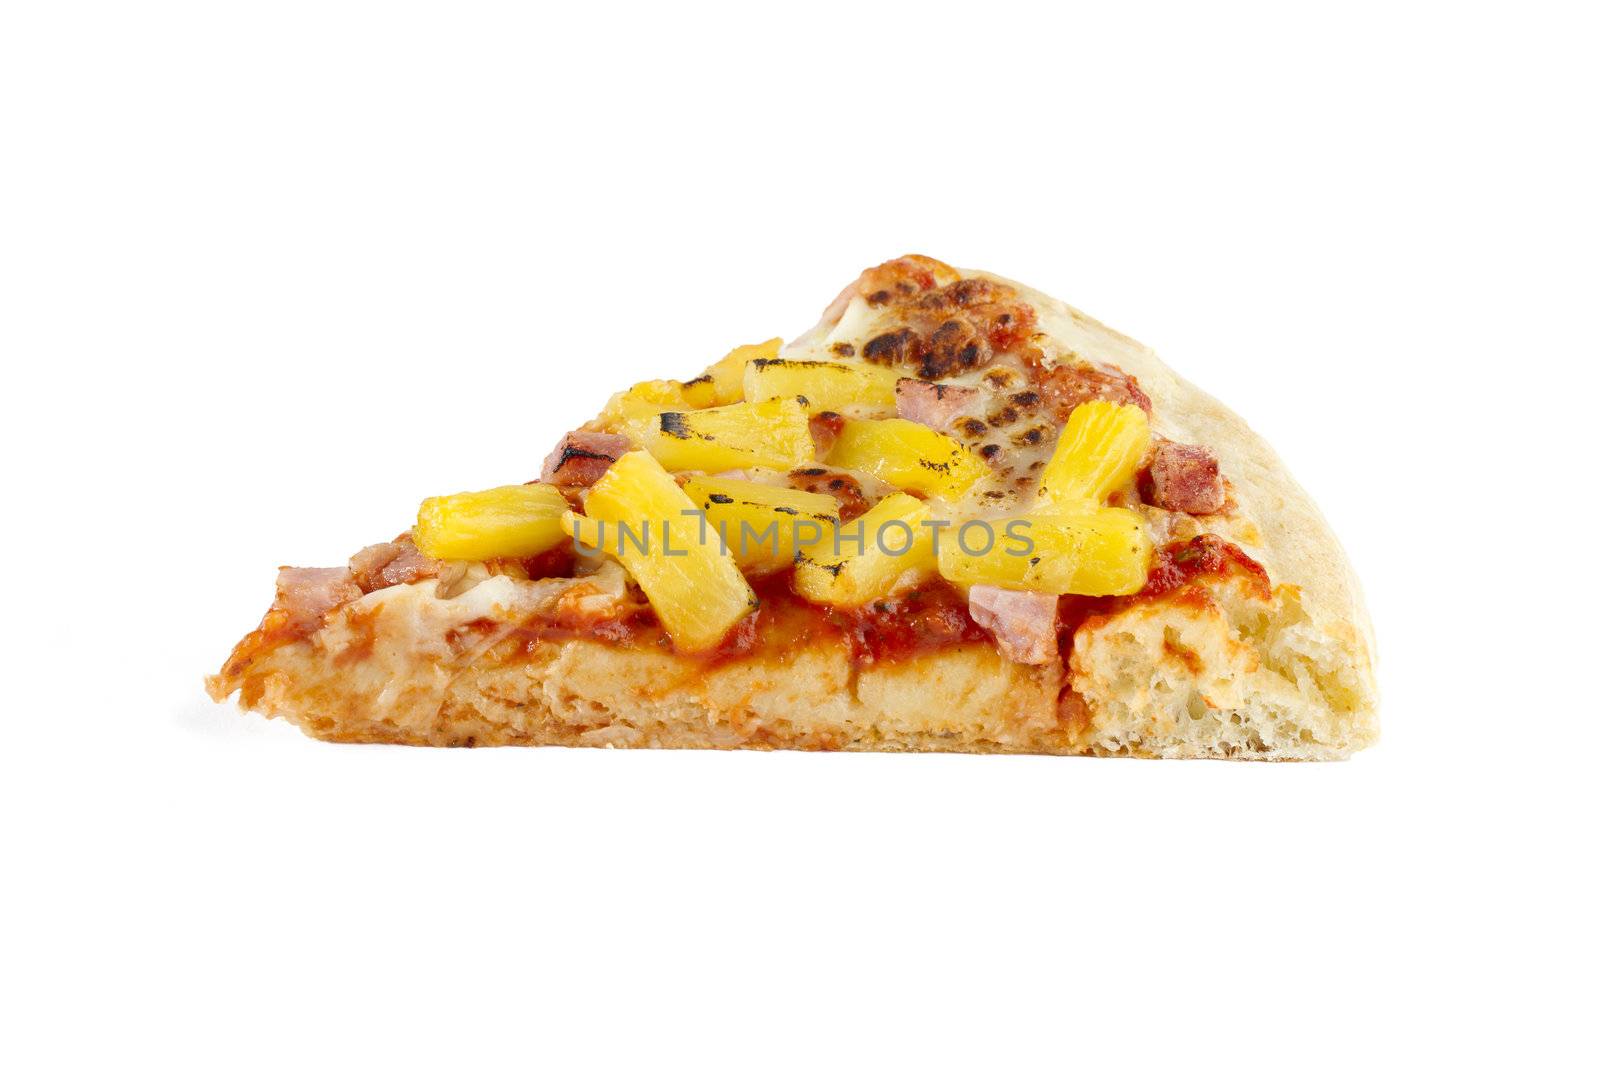 Ham and Pineapple Pizza slice in a close-up image